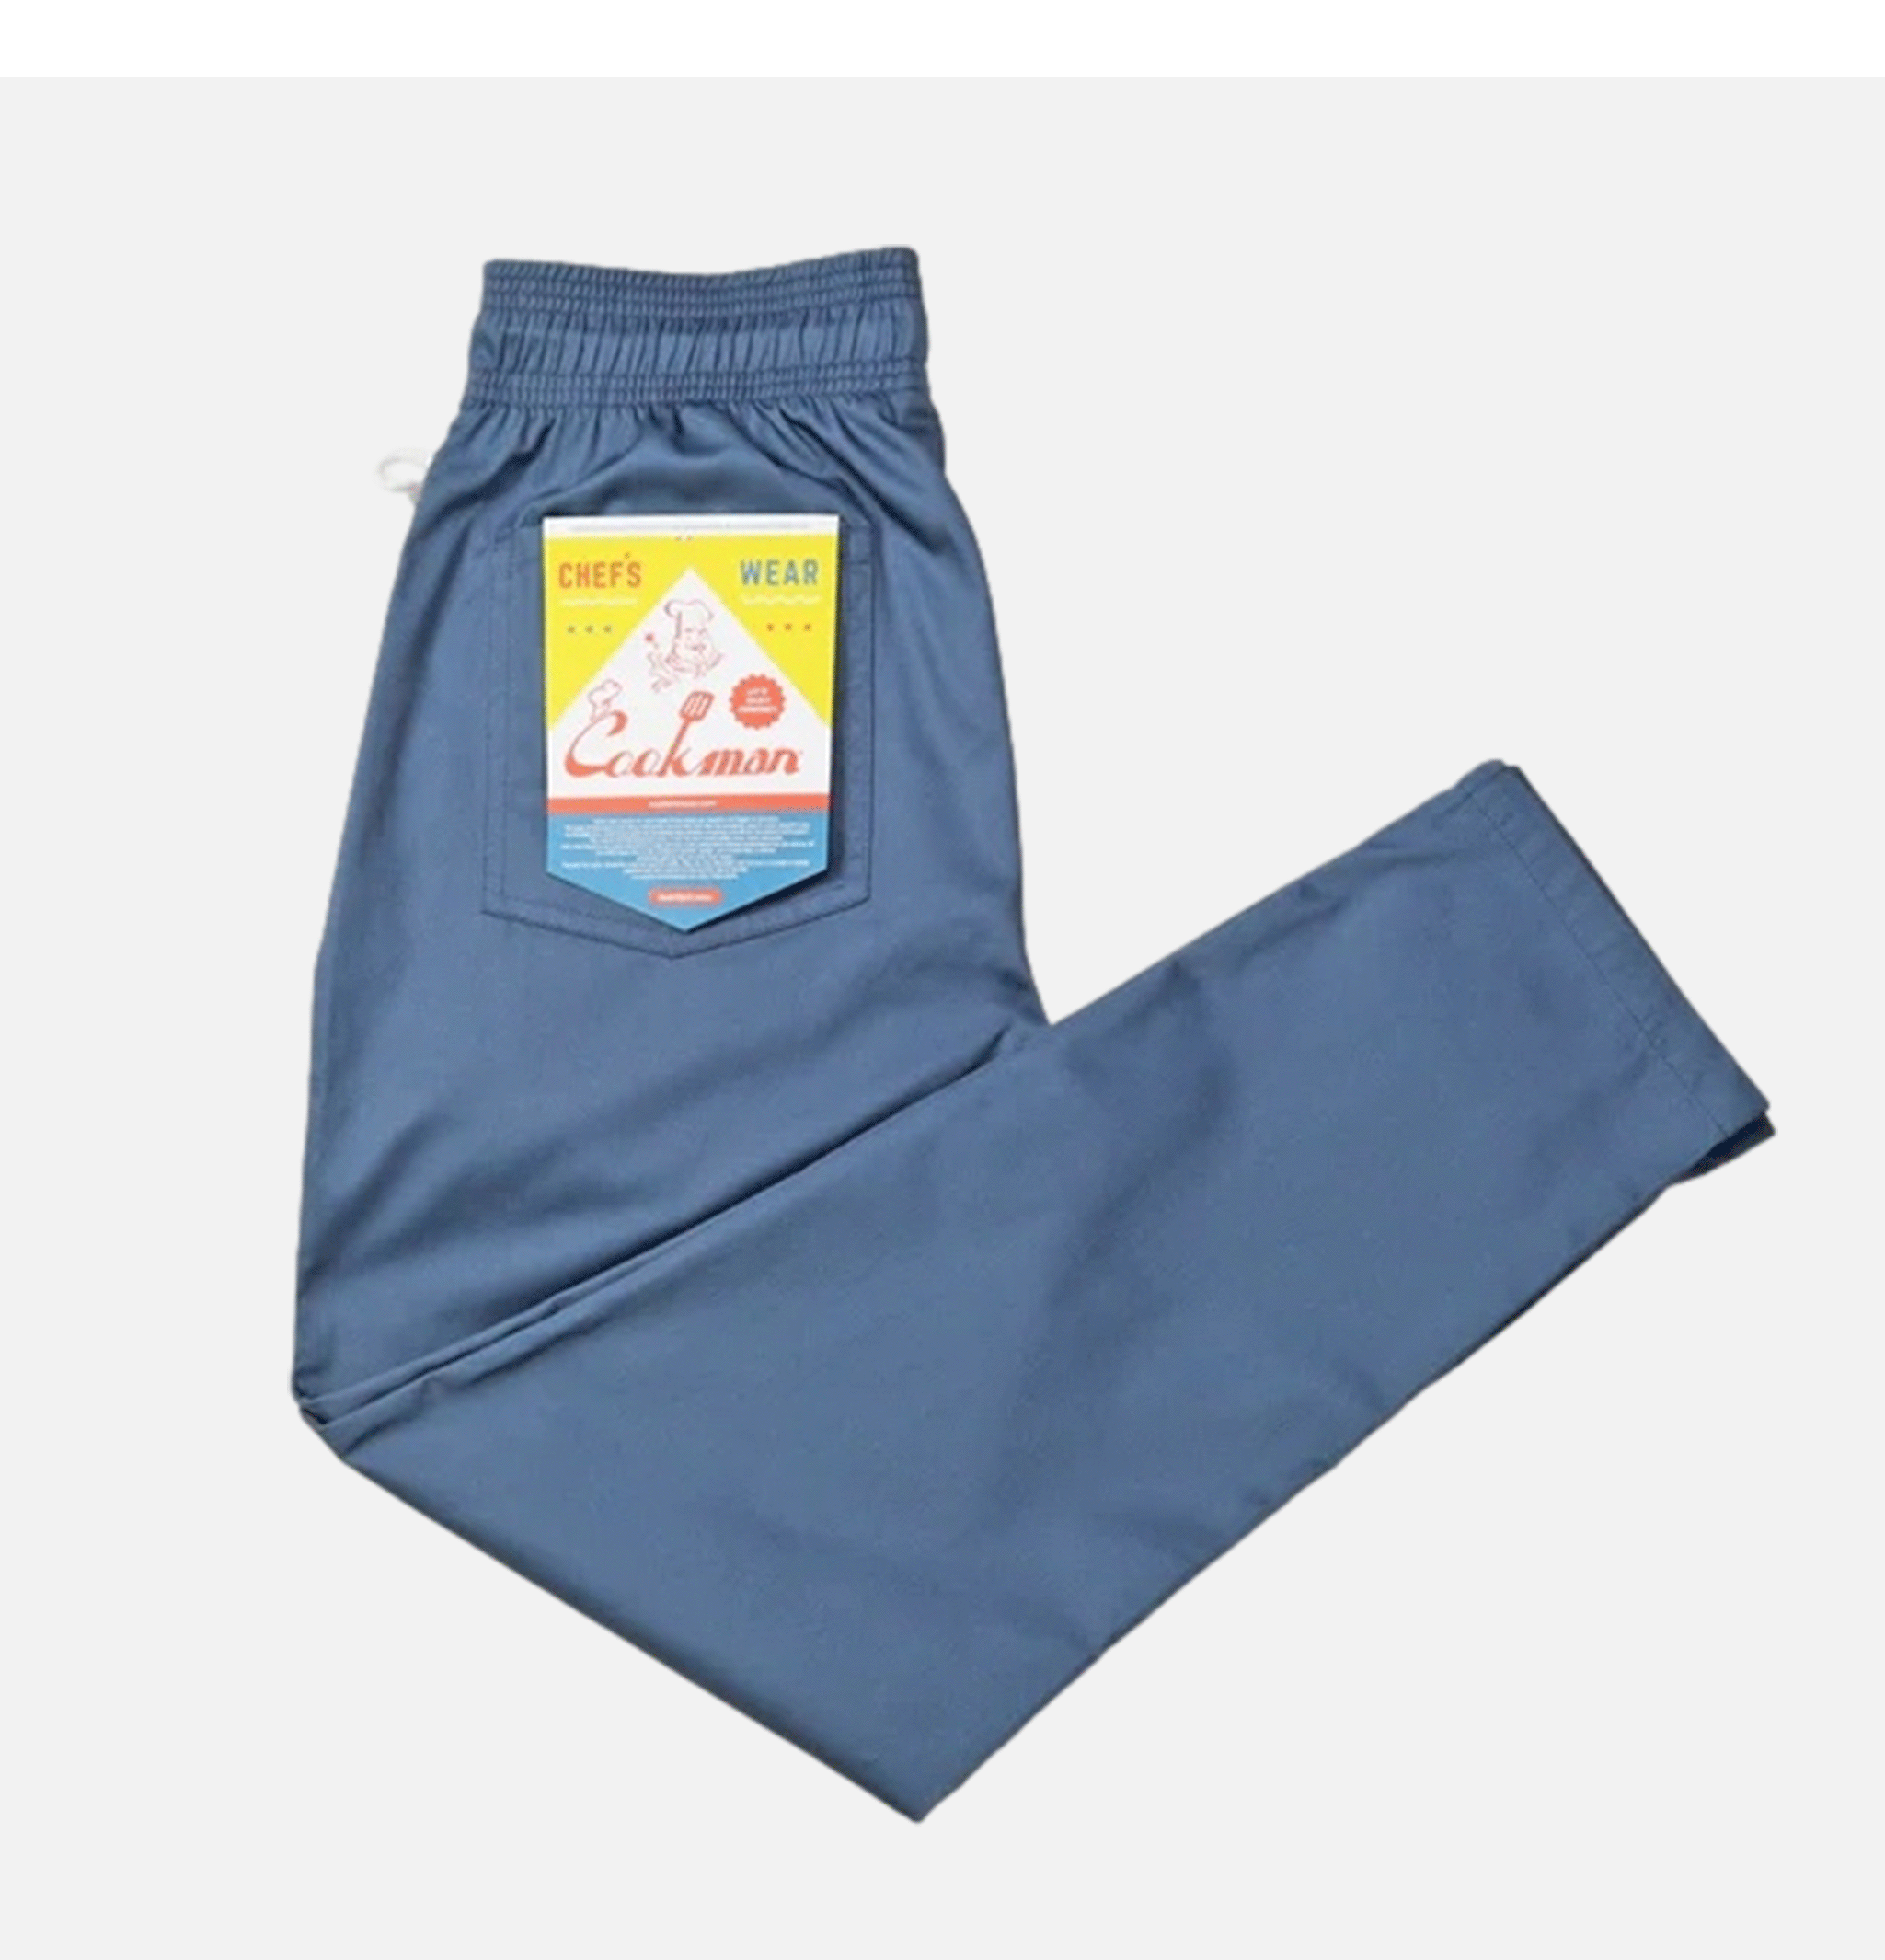 Cookman Chef Pants - Air Force Blue